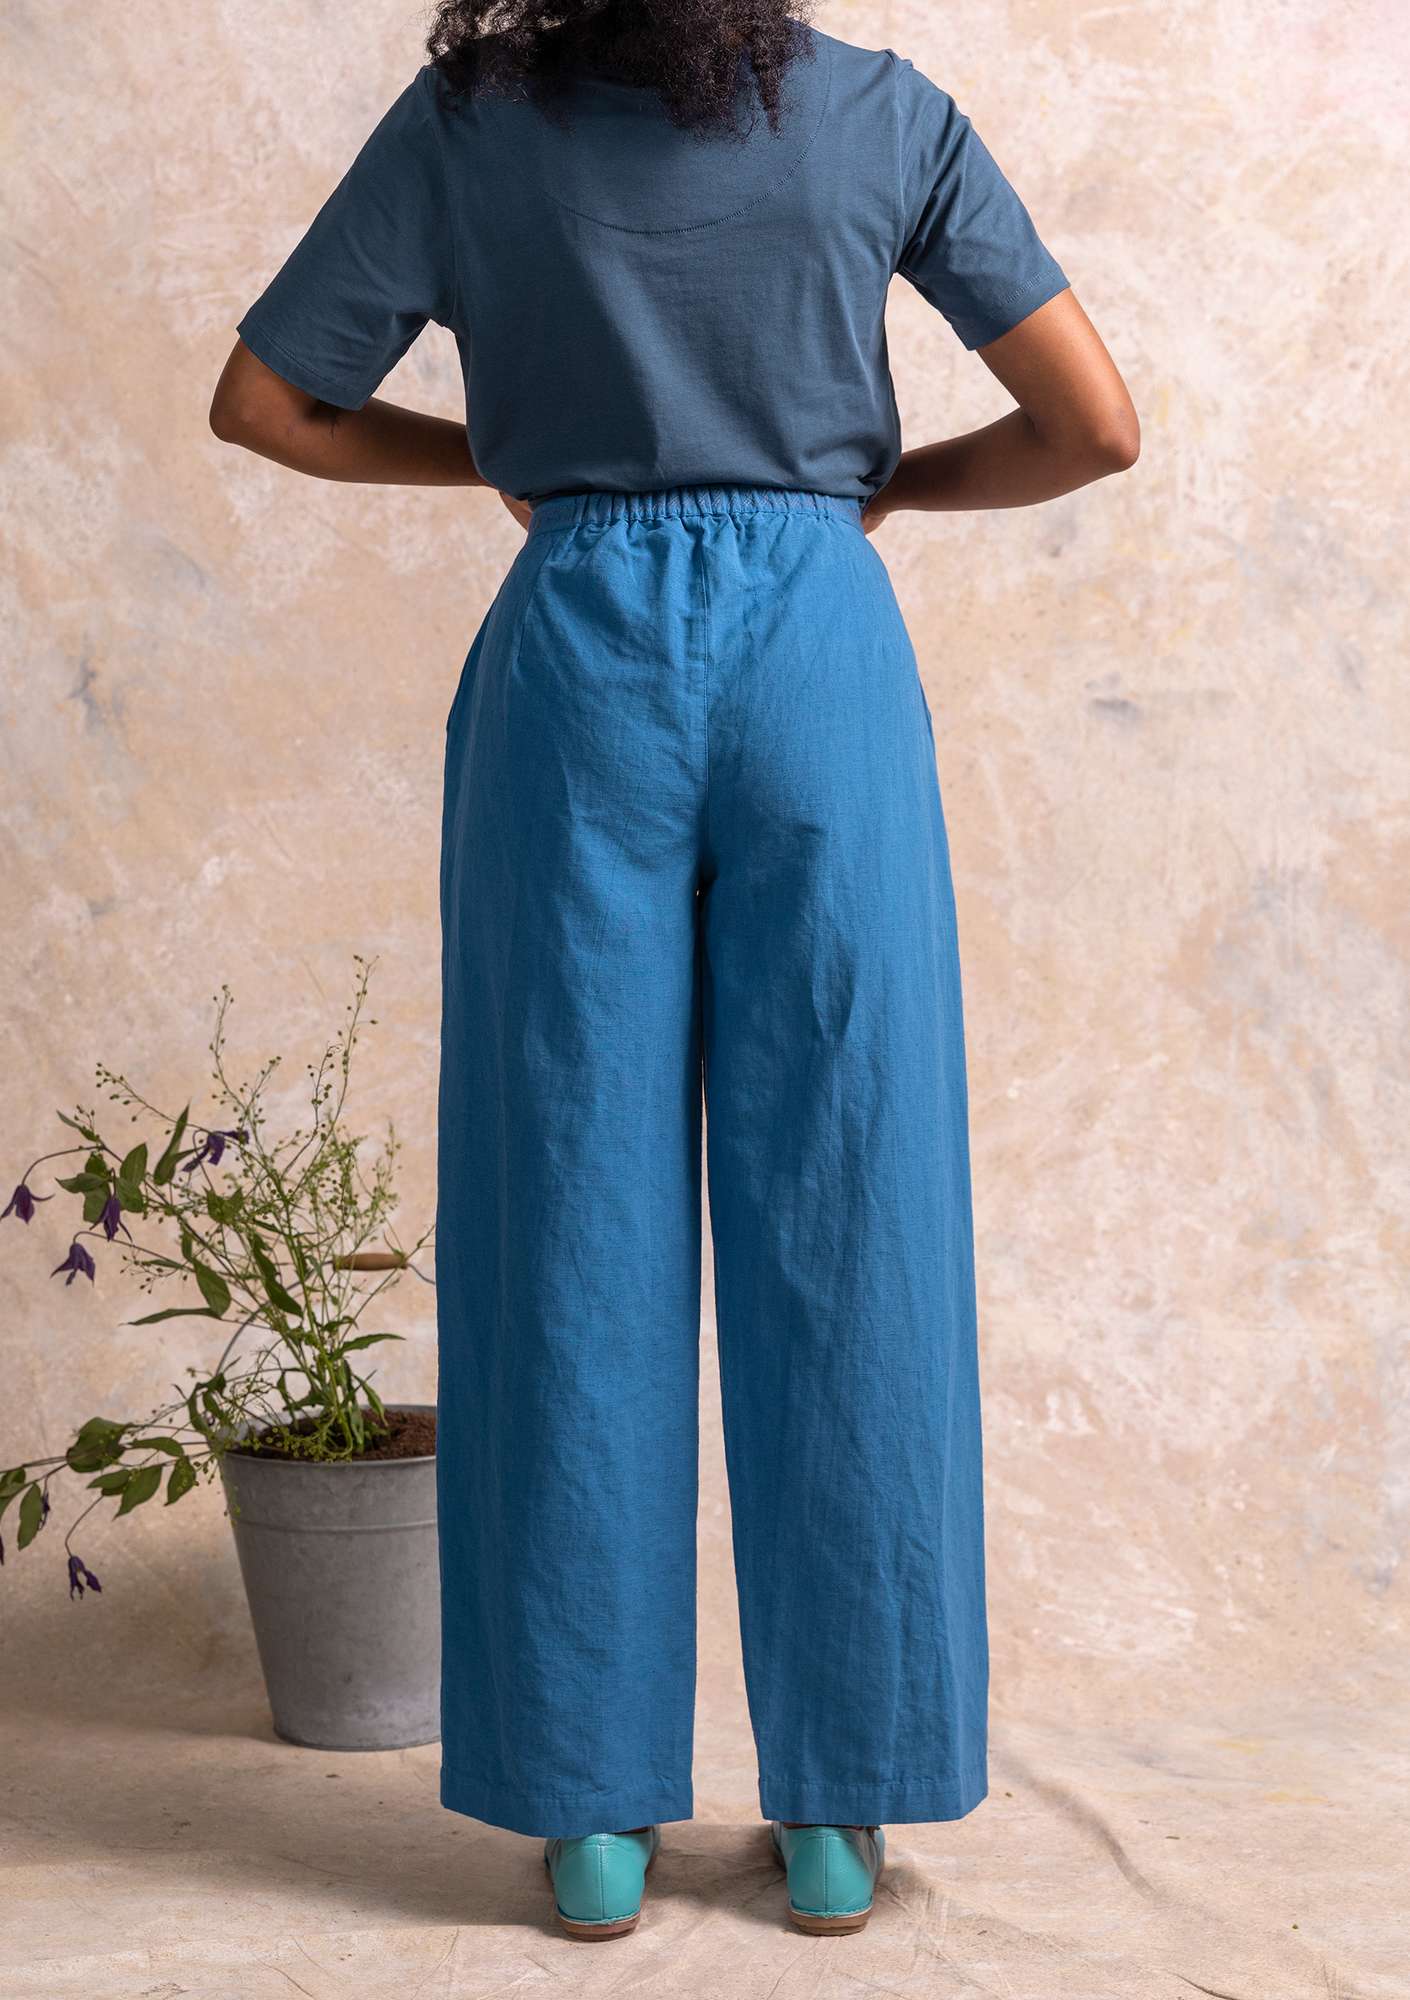 Trousers in a woven cotton/linen blend flax blue